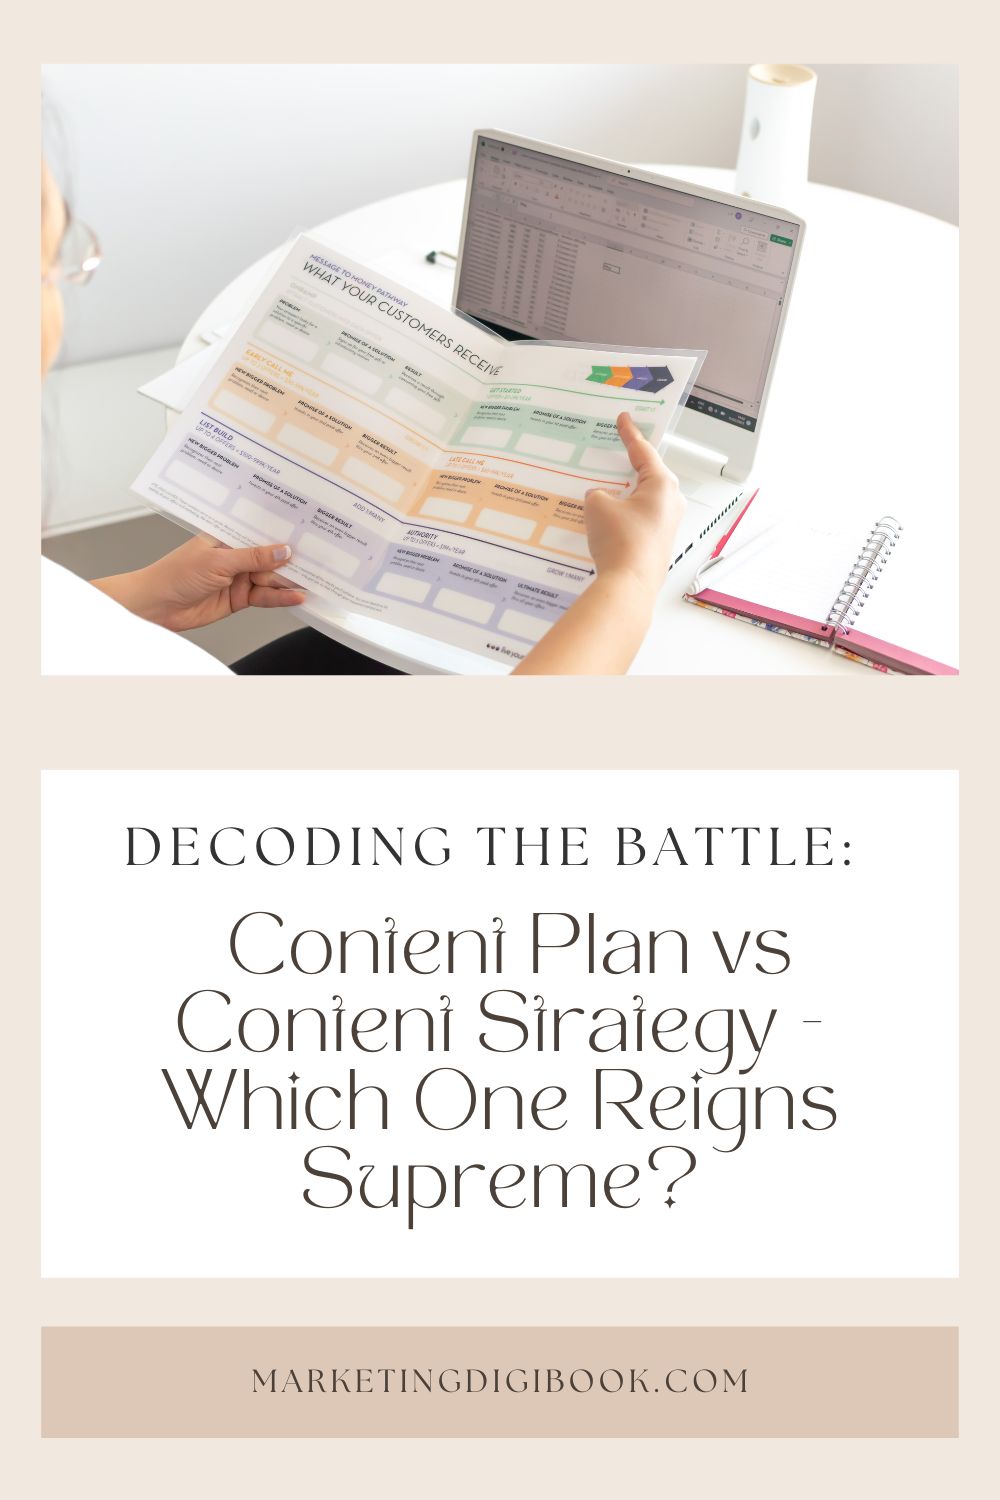 Content Plan vs Content Strategy - Which One Reigns Supreme